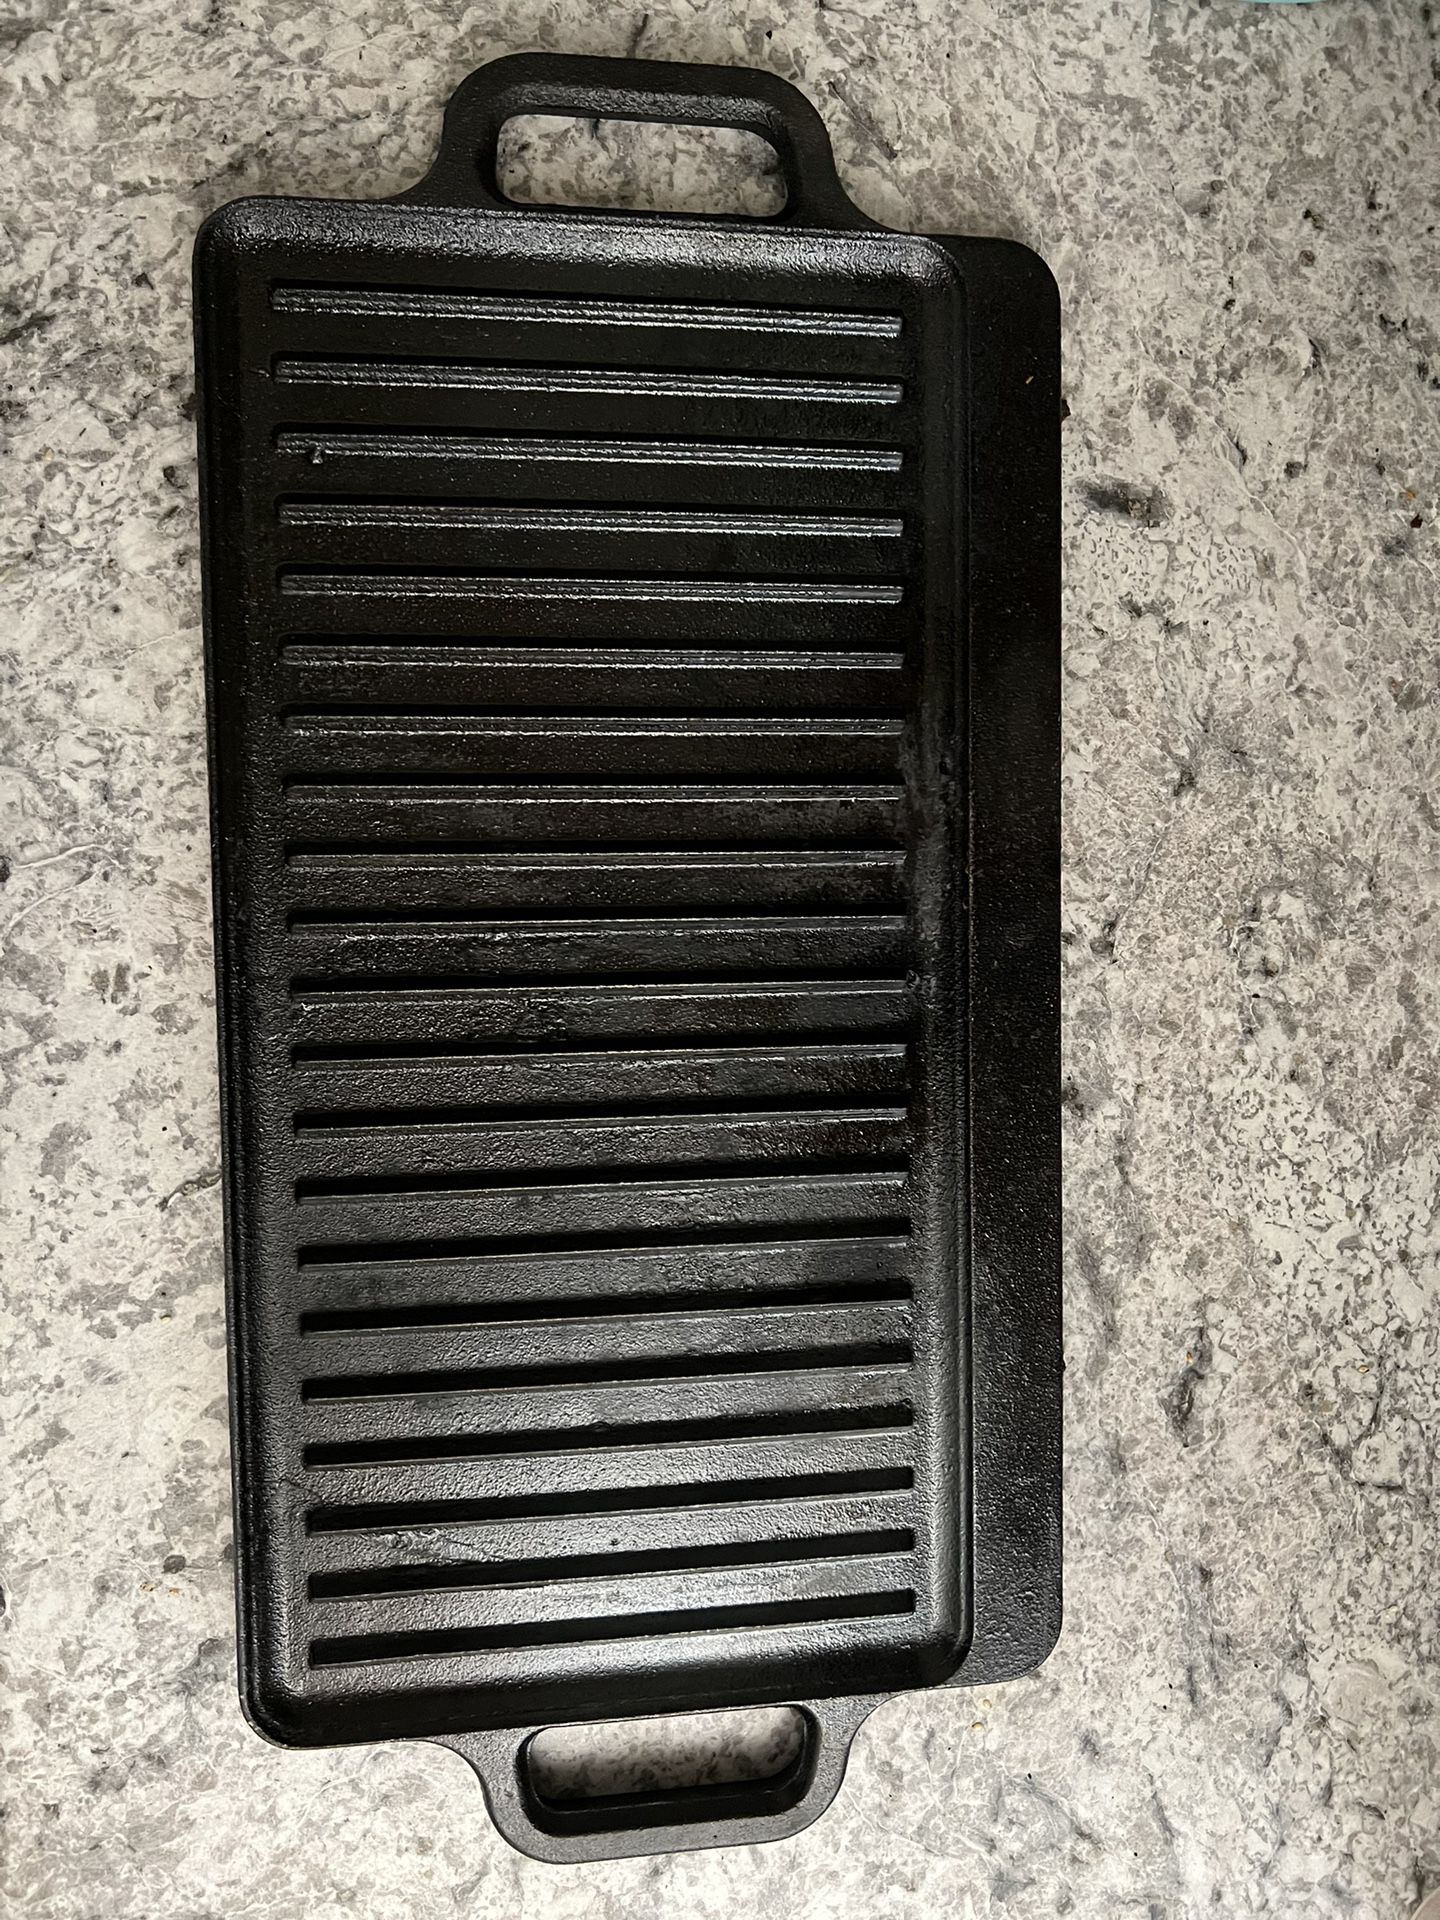 Cast Iron Pancake Griddle for Sale in Scottsdale, AZ - OfferUp